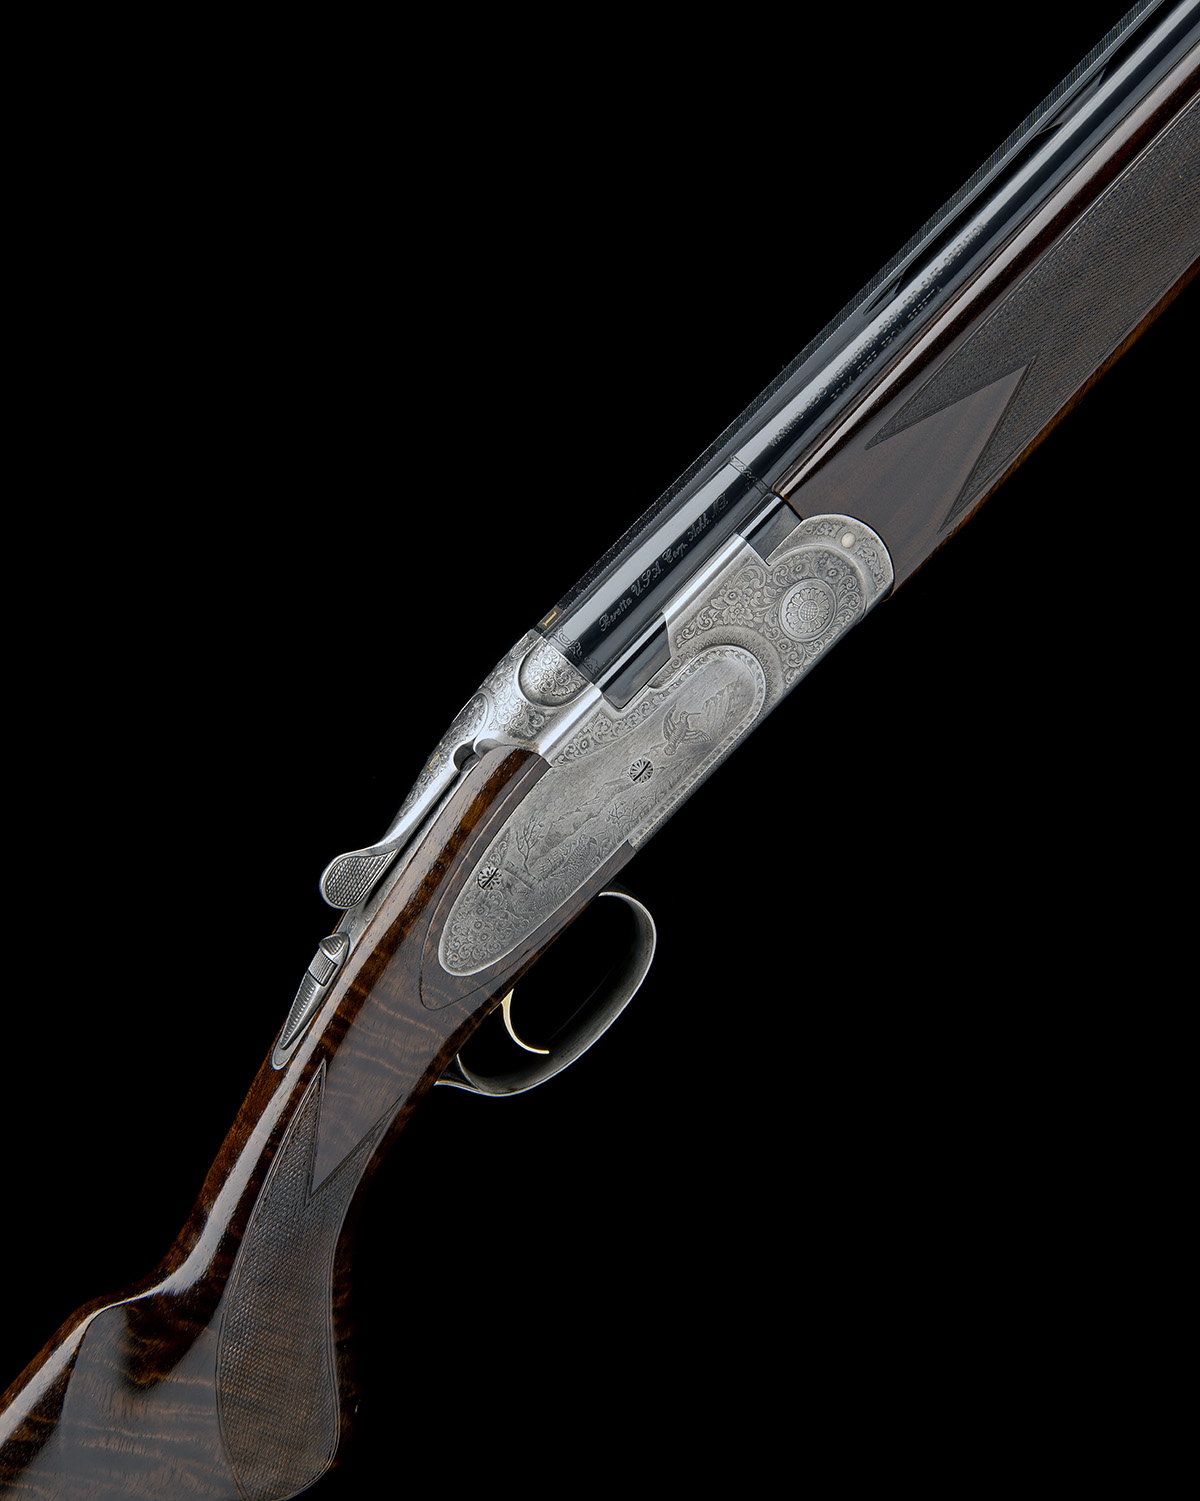 P. BERETTA A 20-BORE (3IN.) 'S687 EELL DIAMOND PIGEON' SIDEPLATED SINGLE-TRIGGER OVER AND UNDER